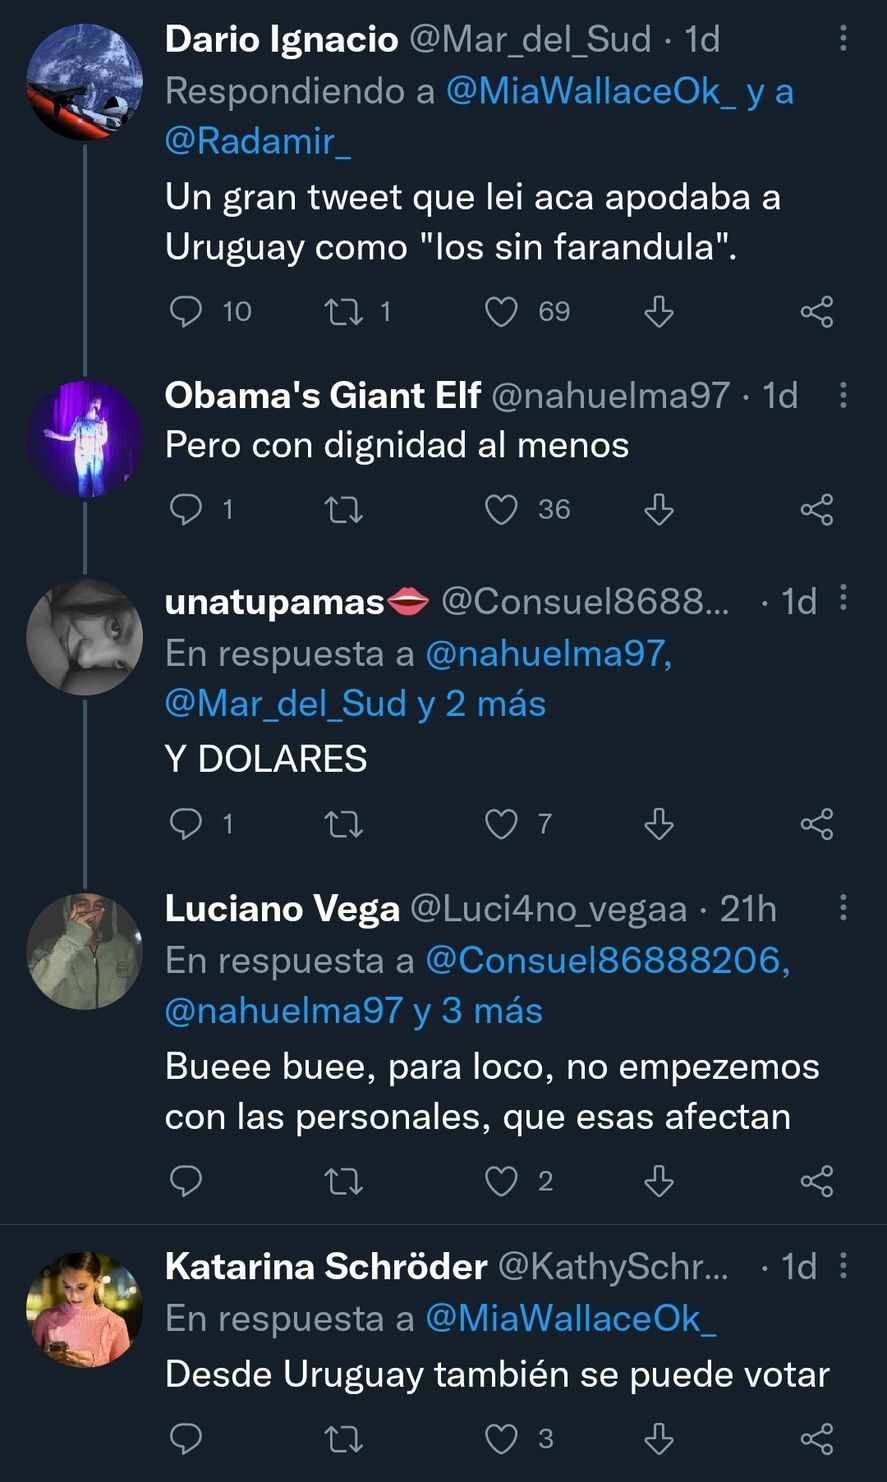 Some of the comments on Twitter from the viralization of the television program in Uruguay that analyzes the Argentine Big Brother 